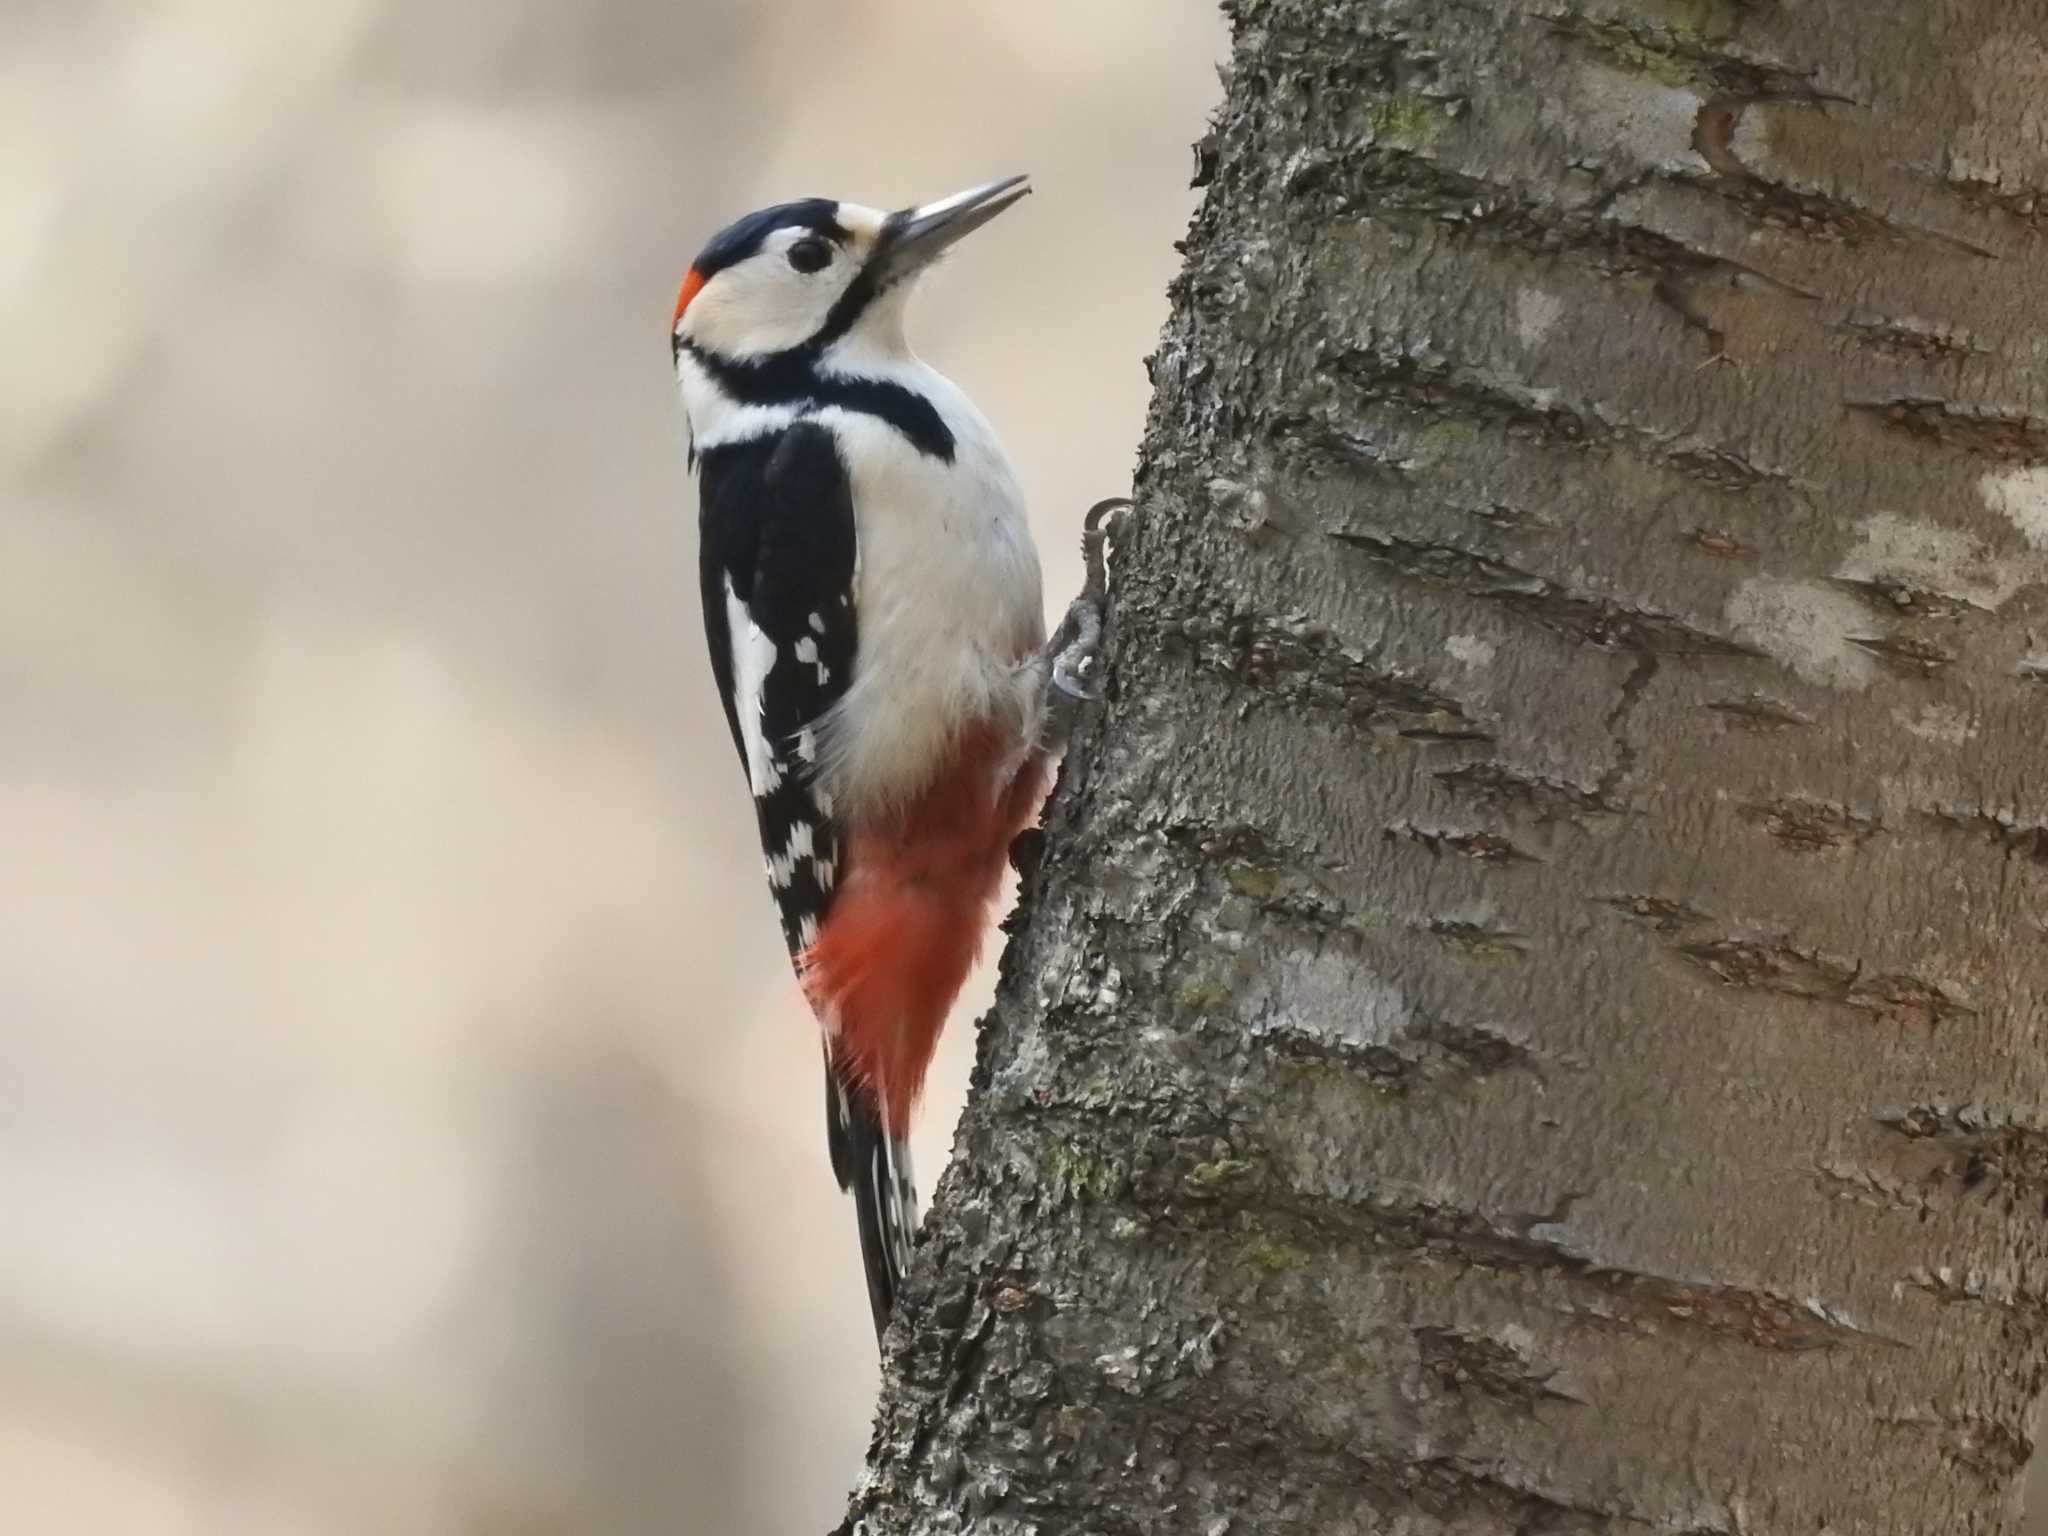 Photo of Great Spotted Woodpecker(japonicus) at 道南四季の杜公園 by ライ